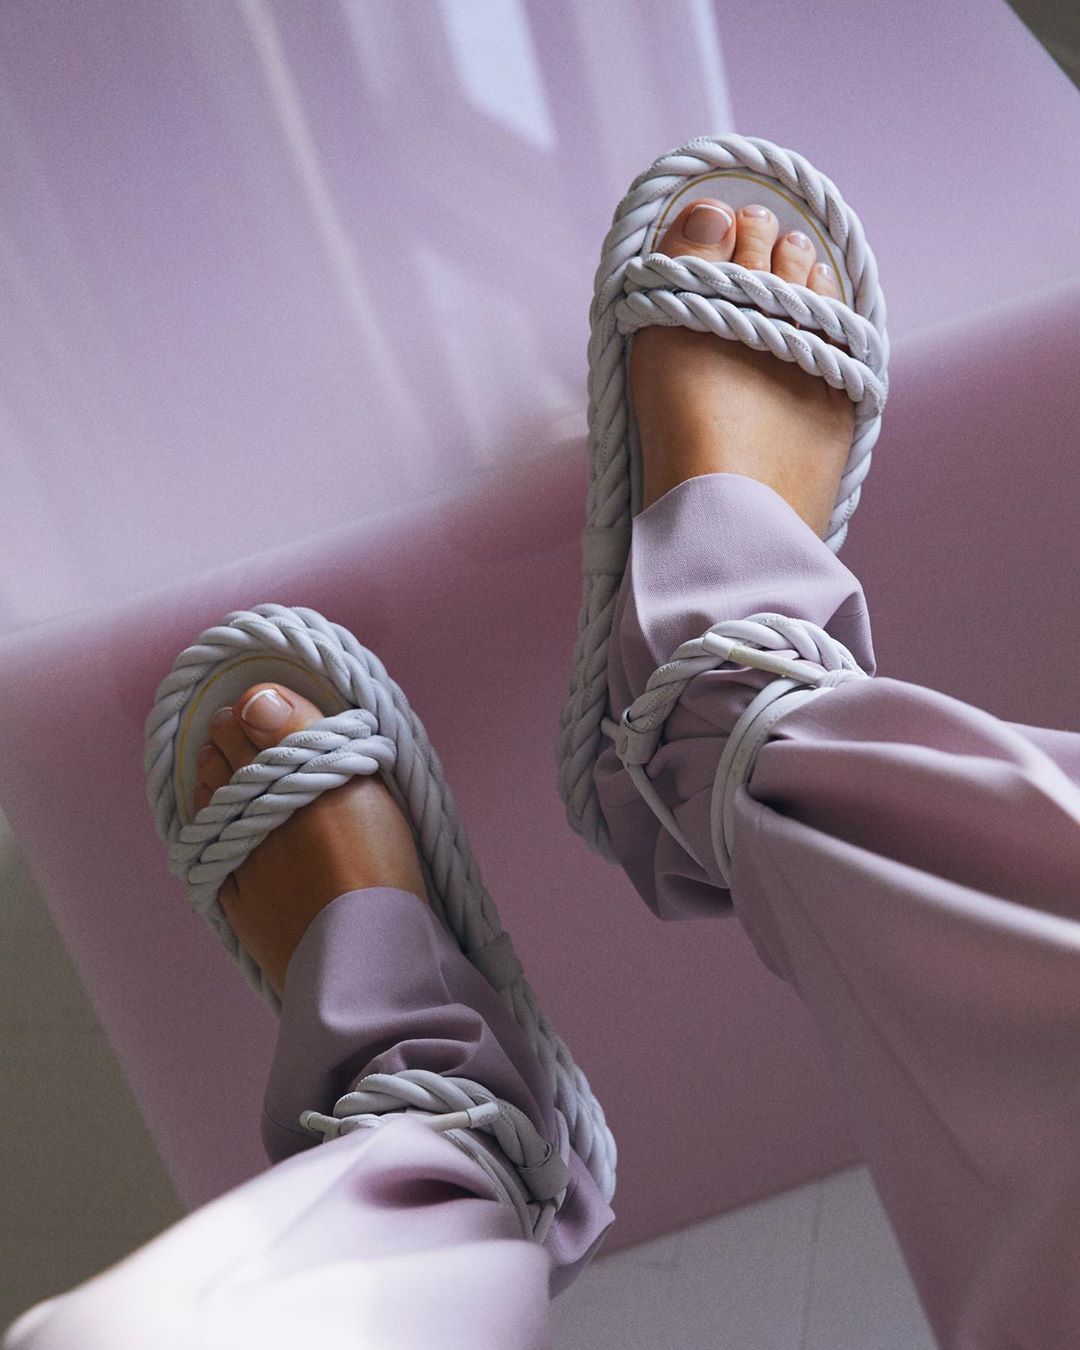 Braided Sandals Are In! Shop our 19 Favorite Options